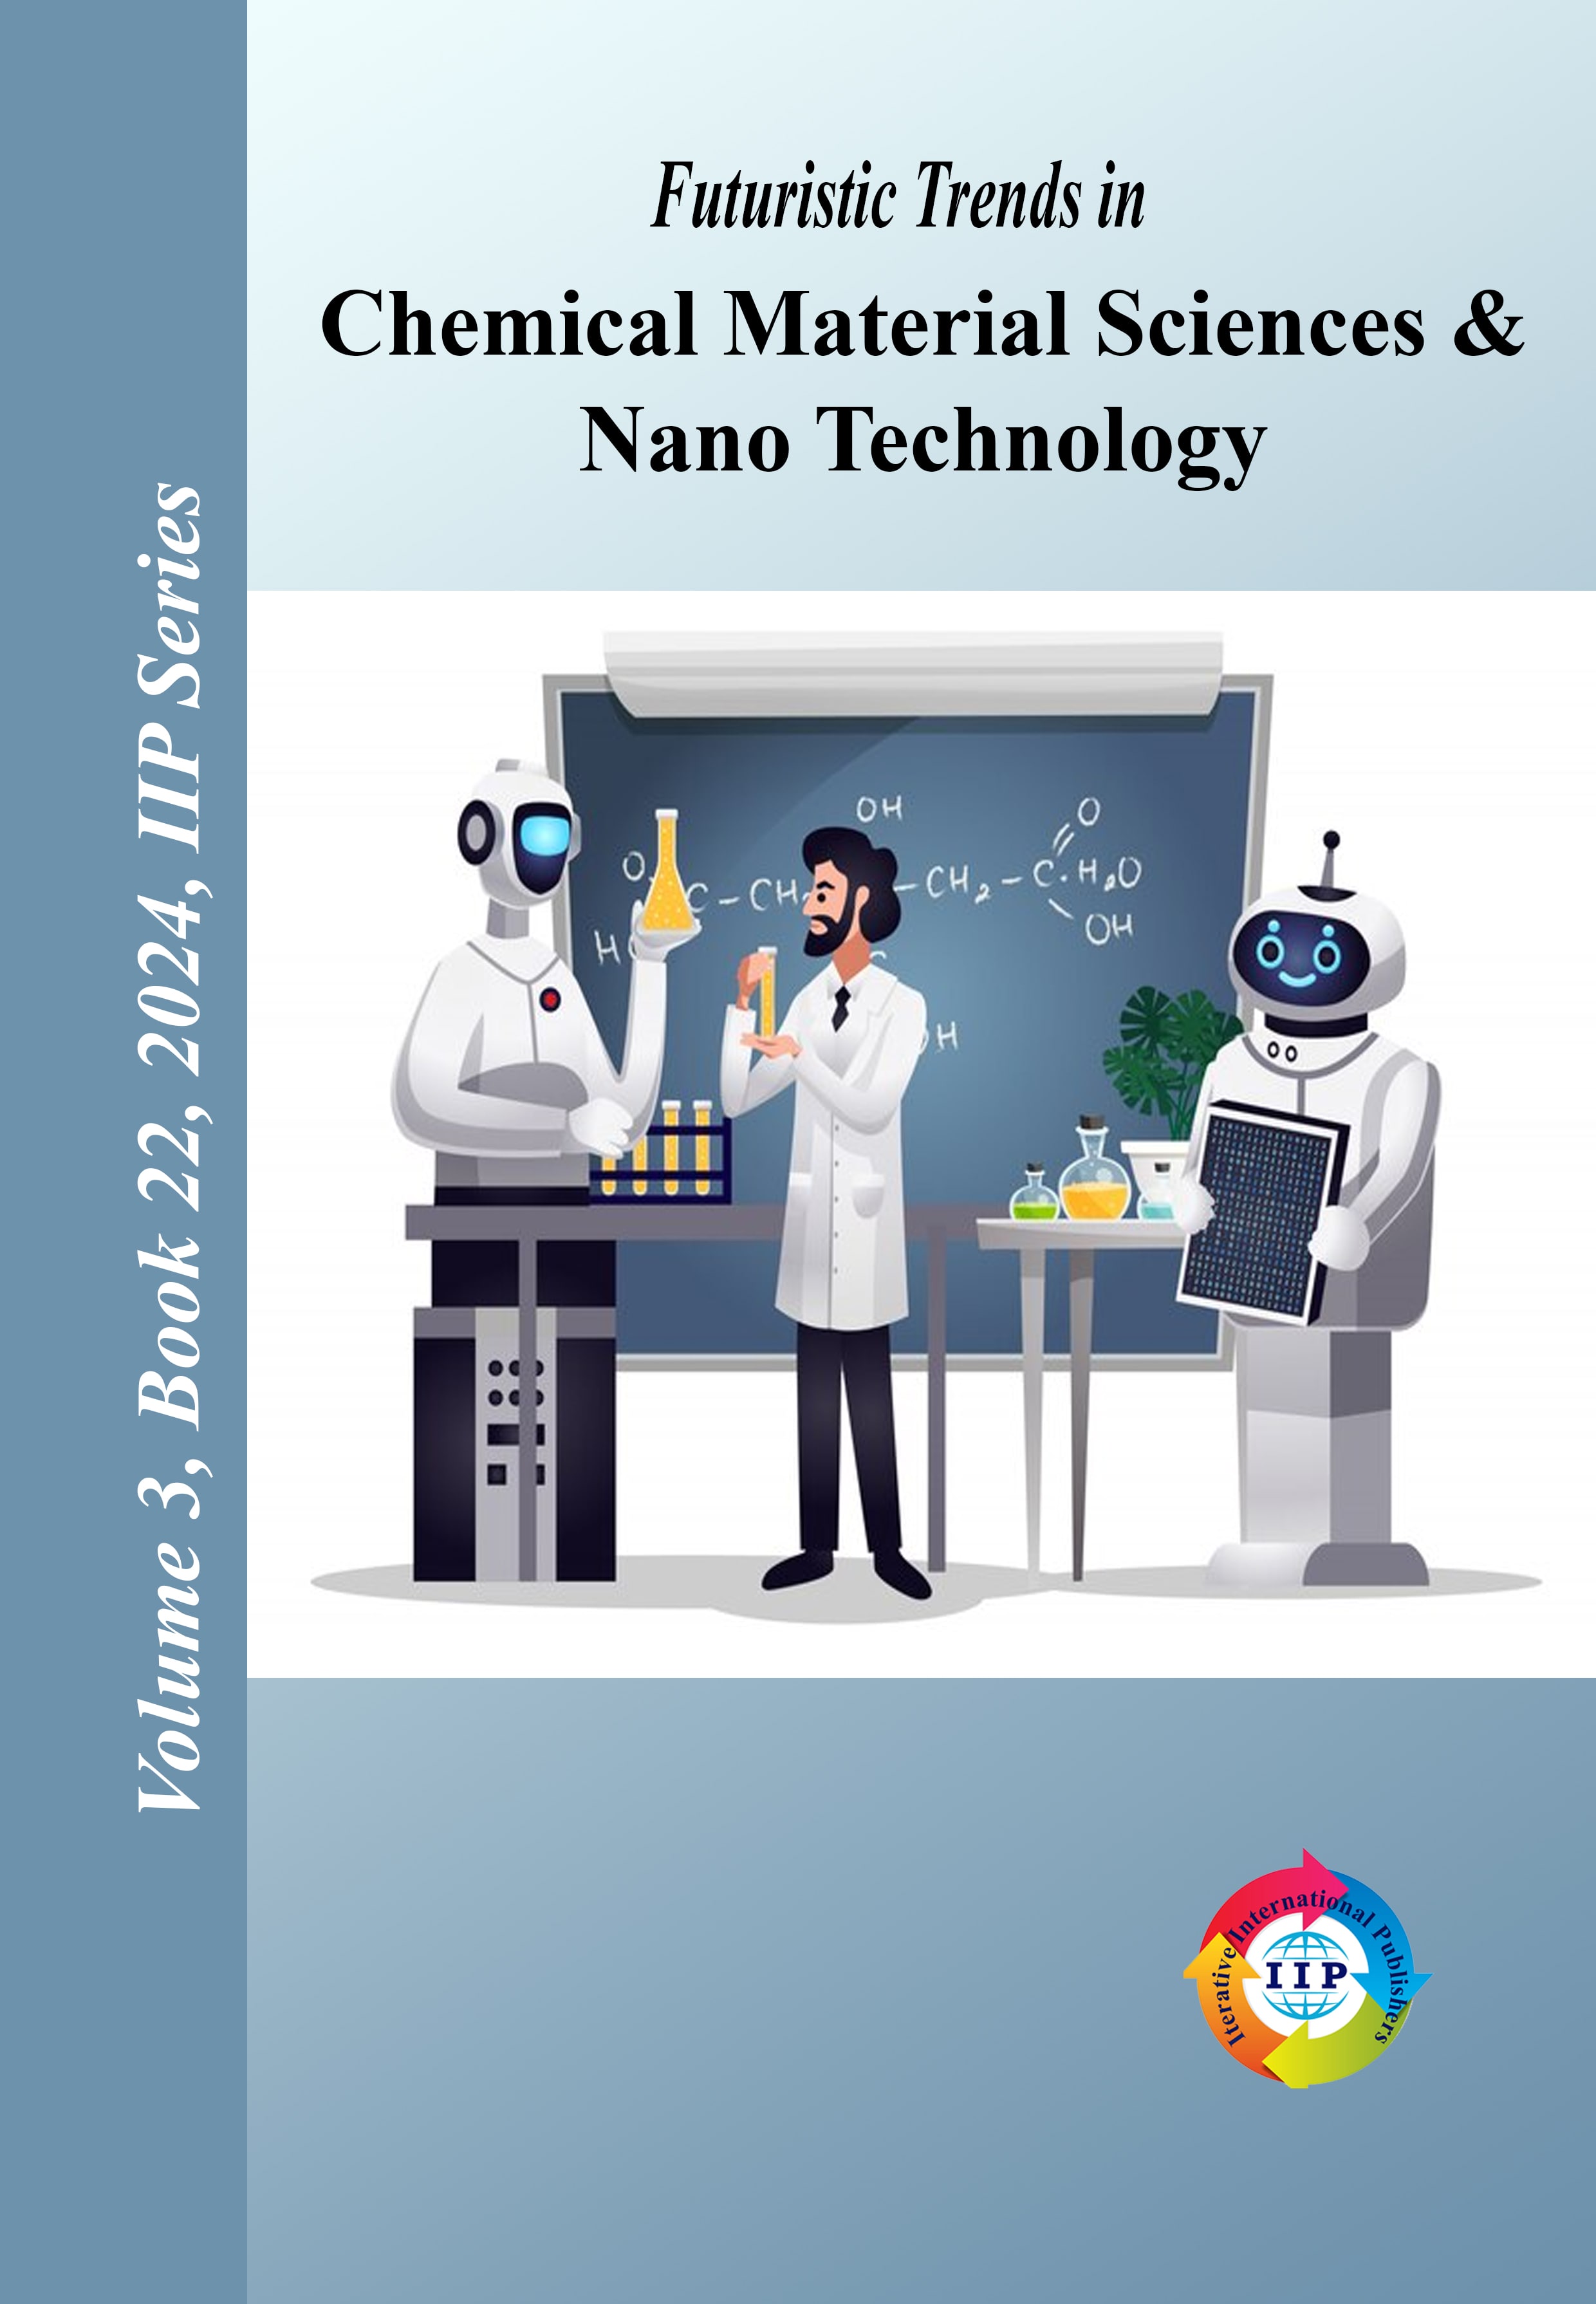 Futuristic Trends in Chemical Material Sciences & Nano Technology  Volume 3 Book 22